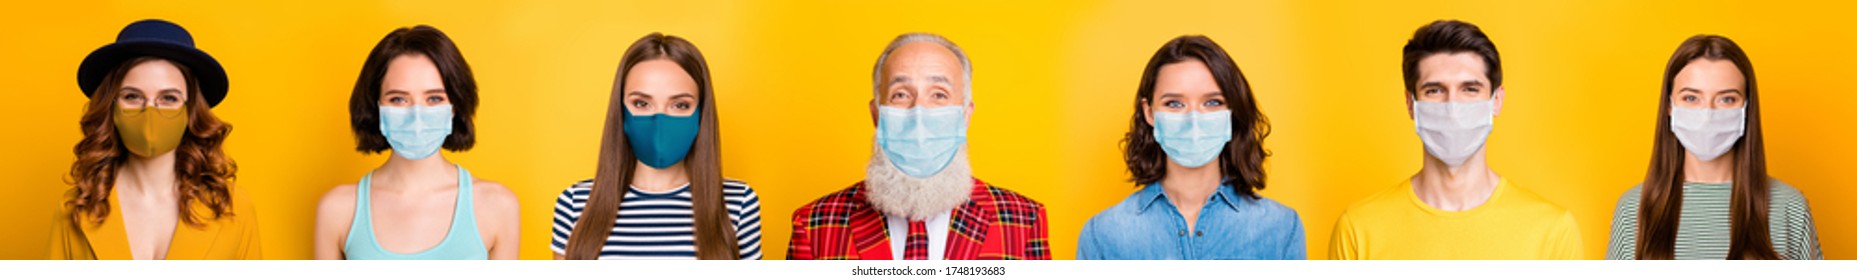 Stay at home covid-2019 fashion trend concept. Photo portrait montage composite multiple image of happy conscious group of people having sterile masks isolated on bright yellow background